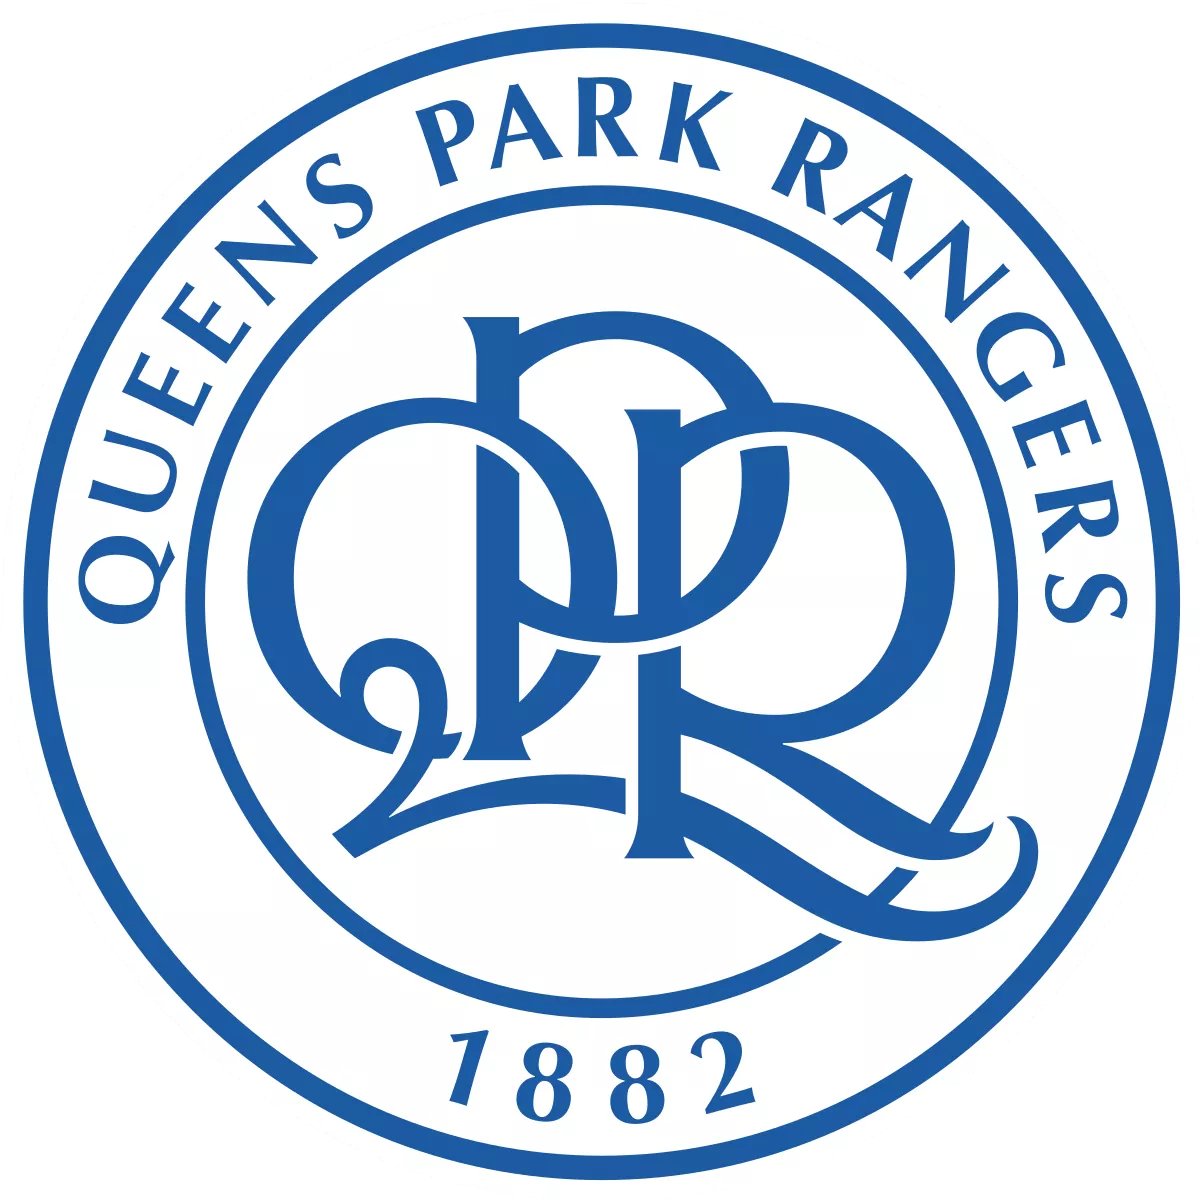 78) QPR Points: 80 Manager: Stuart Pearce QPR fans can count themselves unlucky here. Considering how close they are to Central London I really dont know how they find themselves stuck with literally just Josh Murphy. You guys really don't want to know what your rivals have